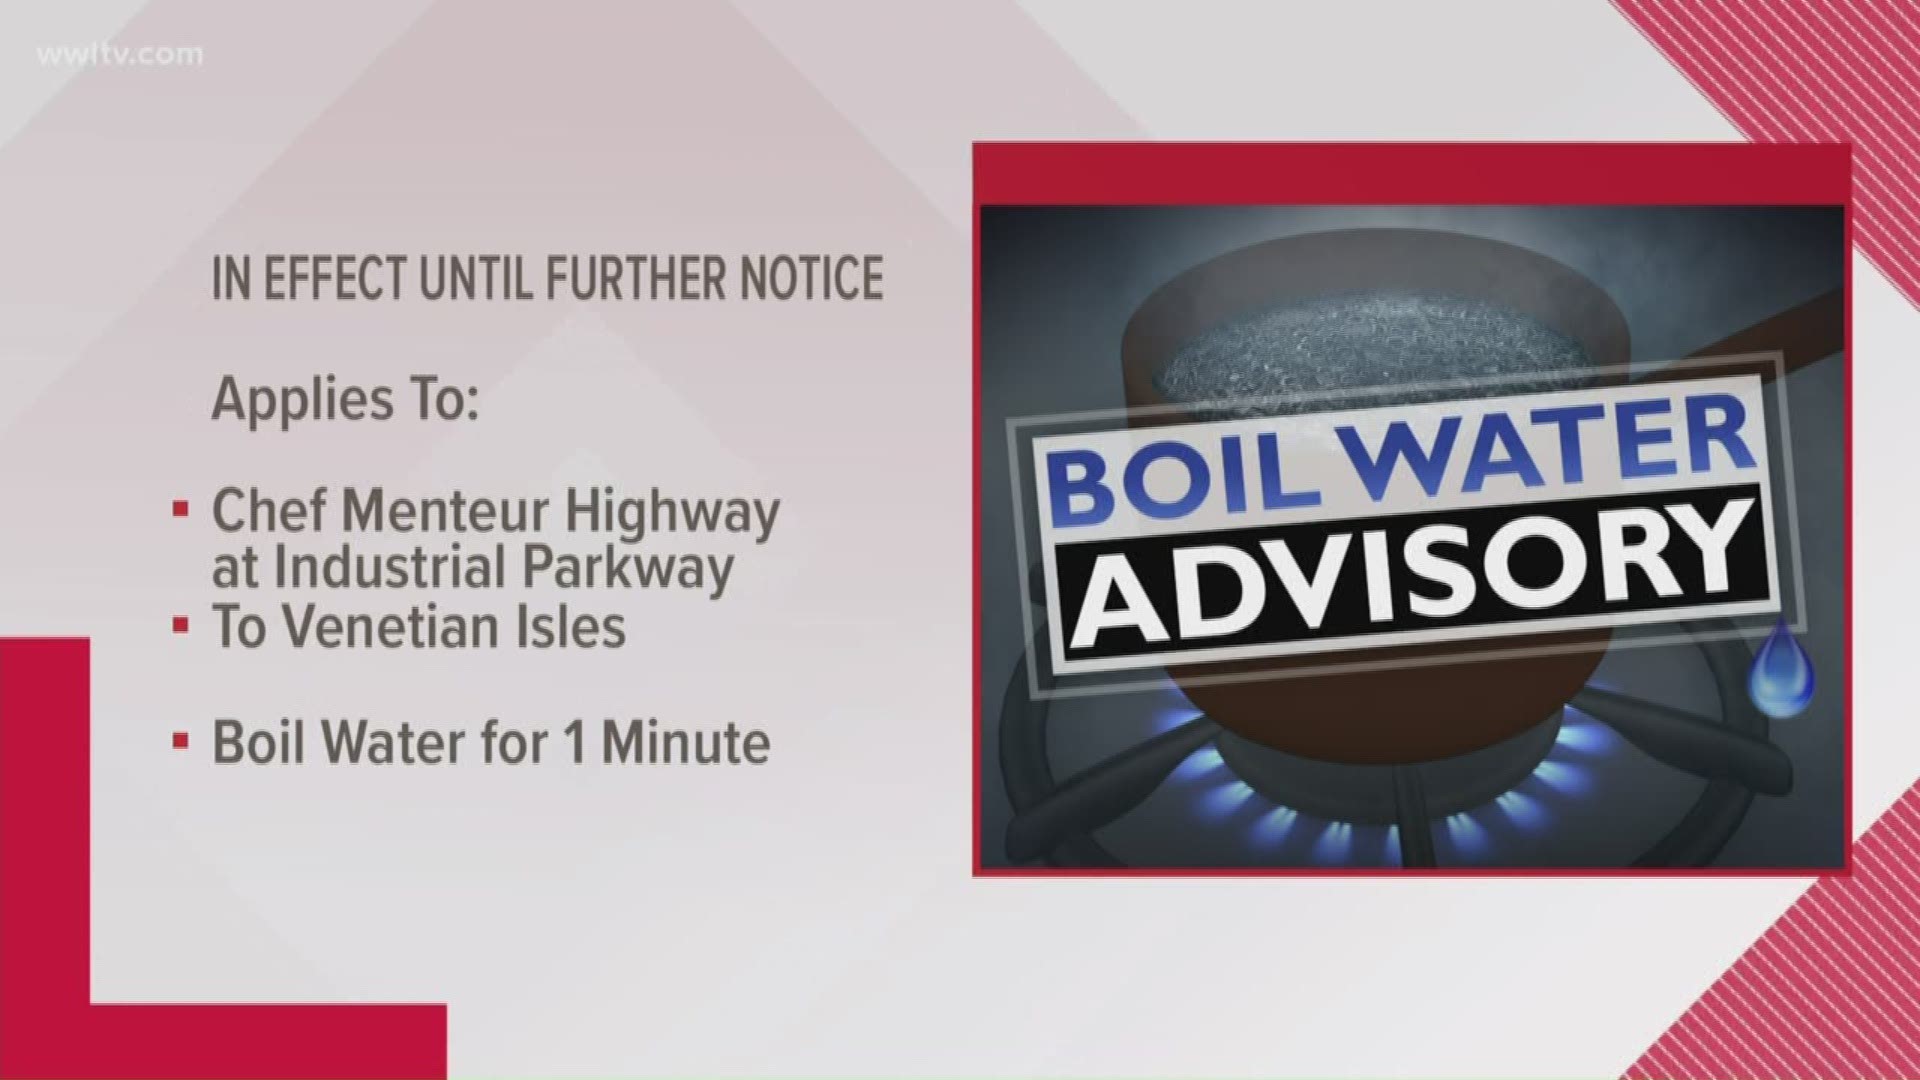 The New Orleans Sewerage & Water Board has issued a boil water advisory Friday for parts of New Orleans East along Chef Menteur Highway.